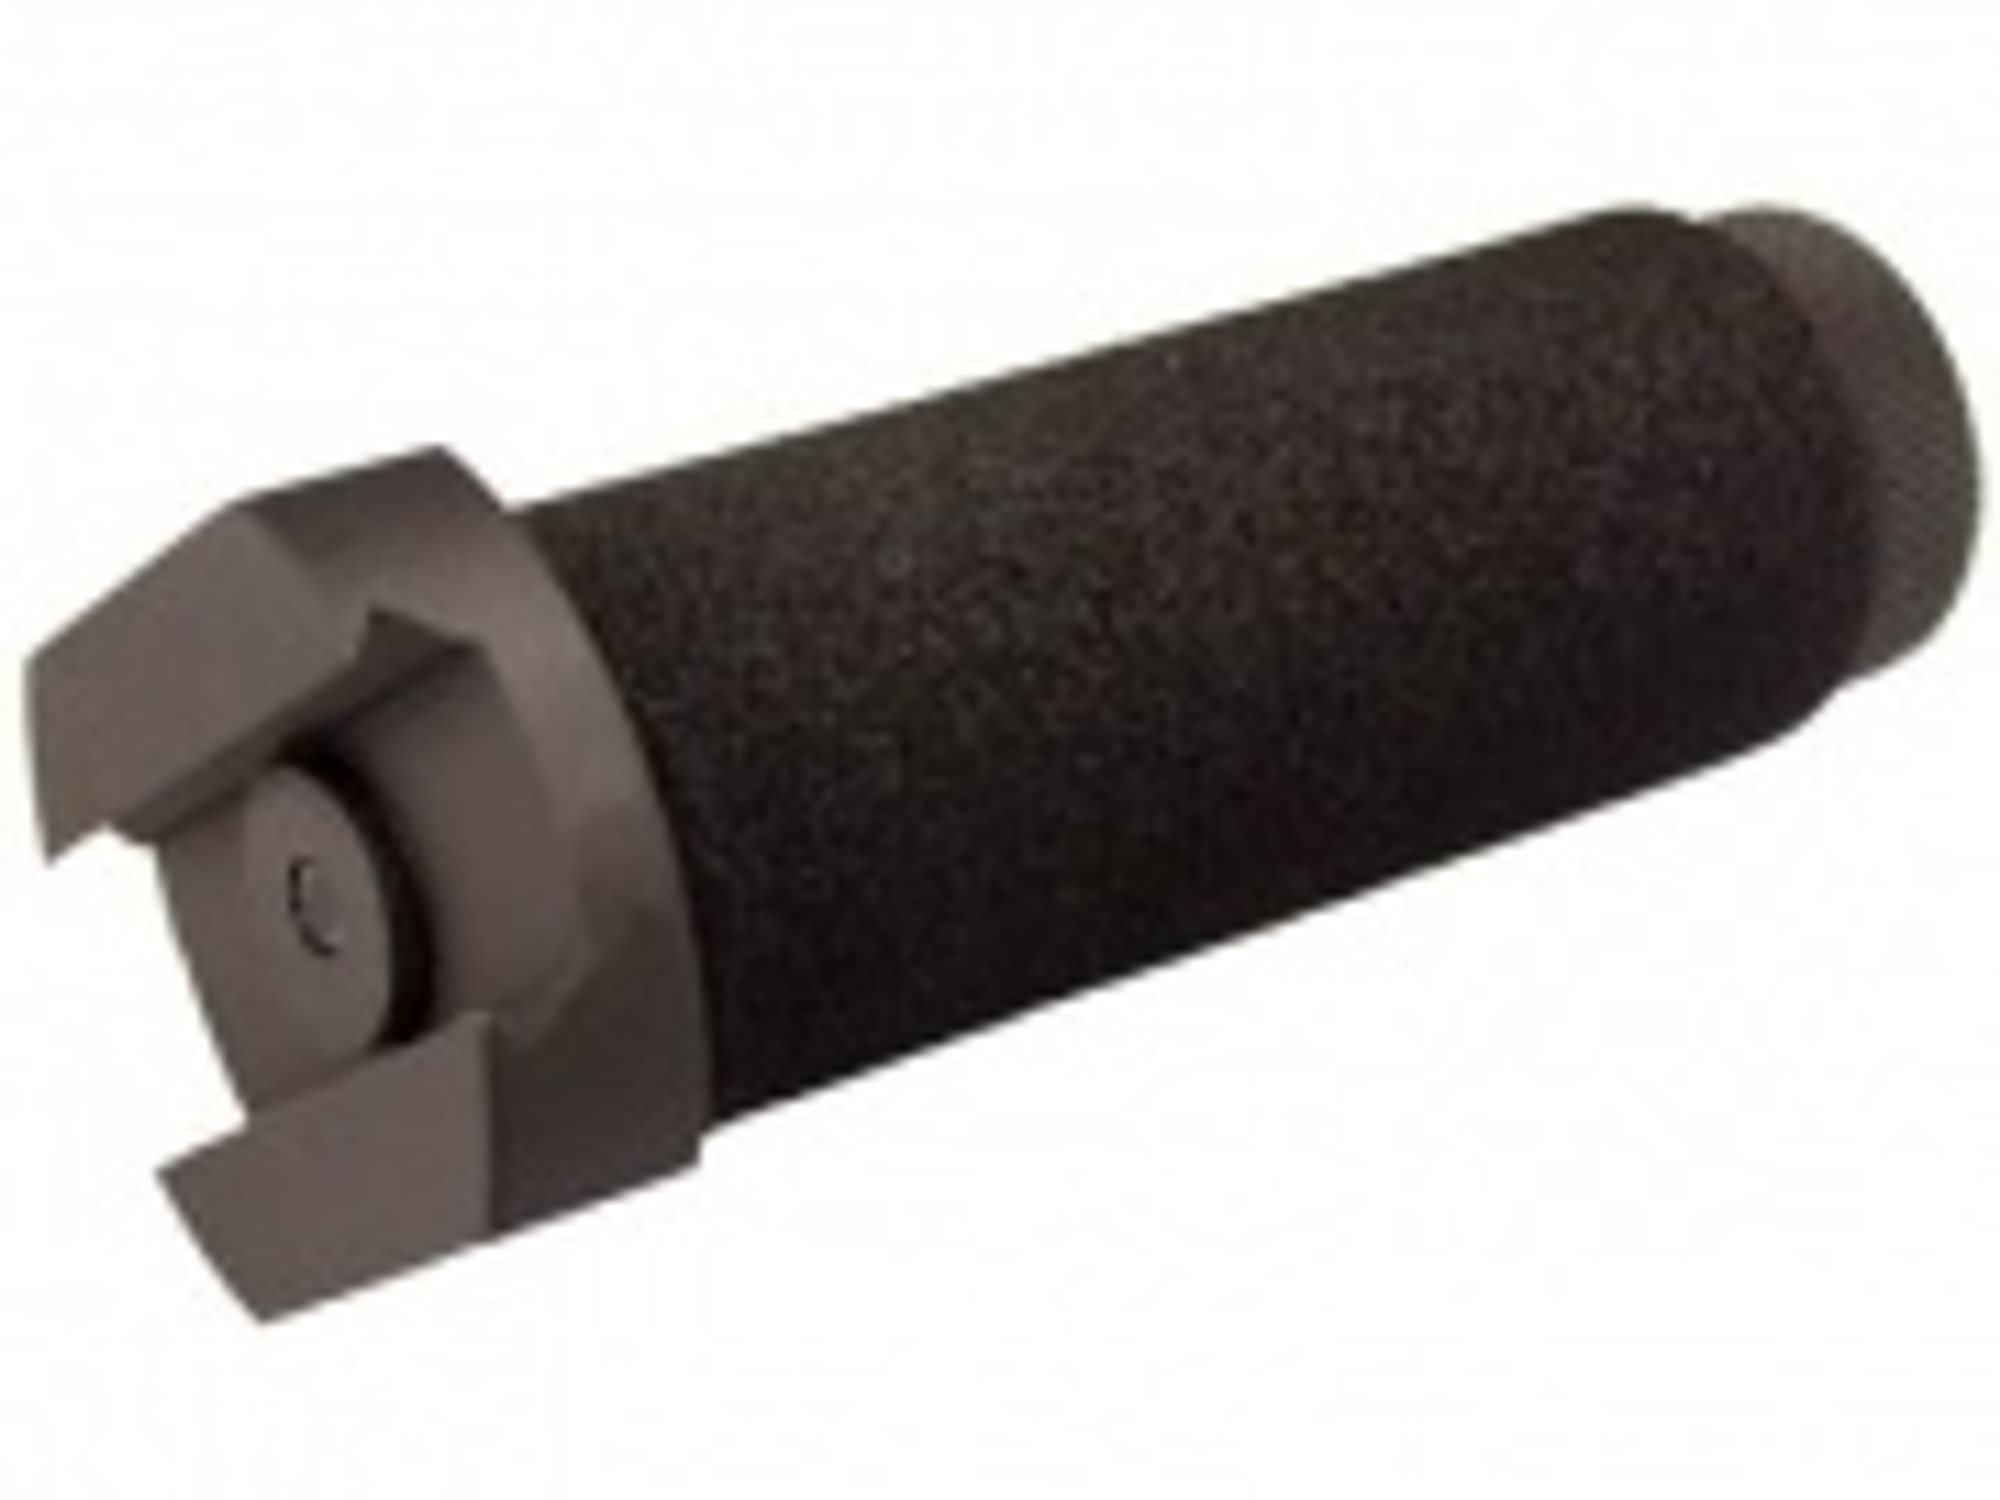 MA-74 Tactical Fore Grip